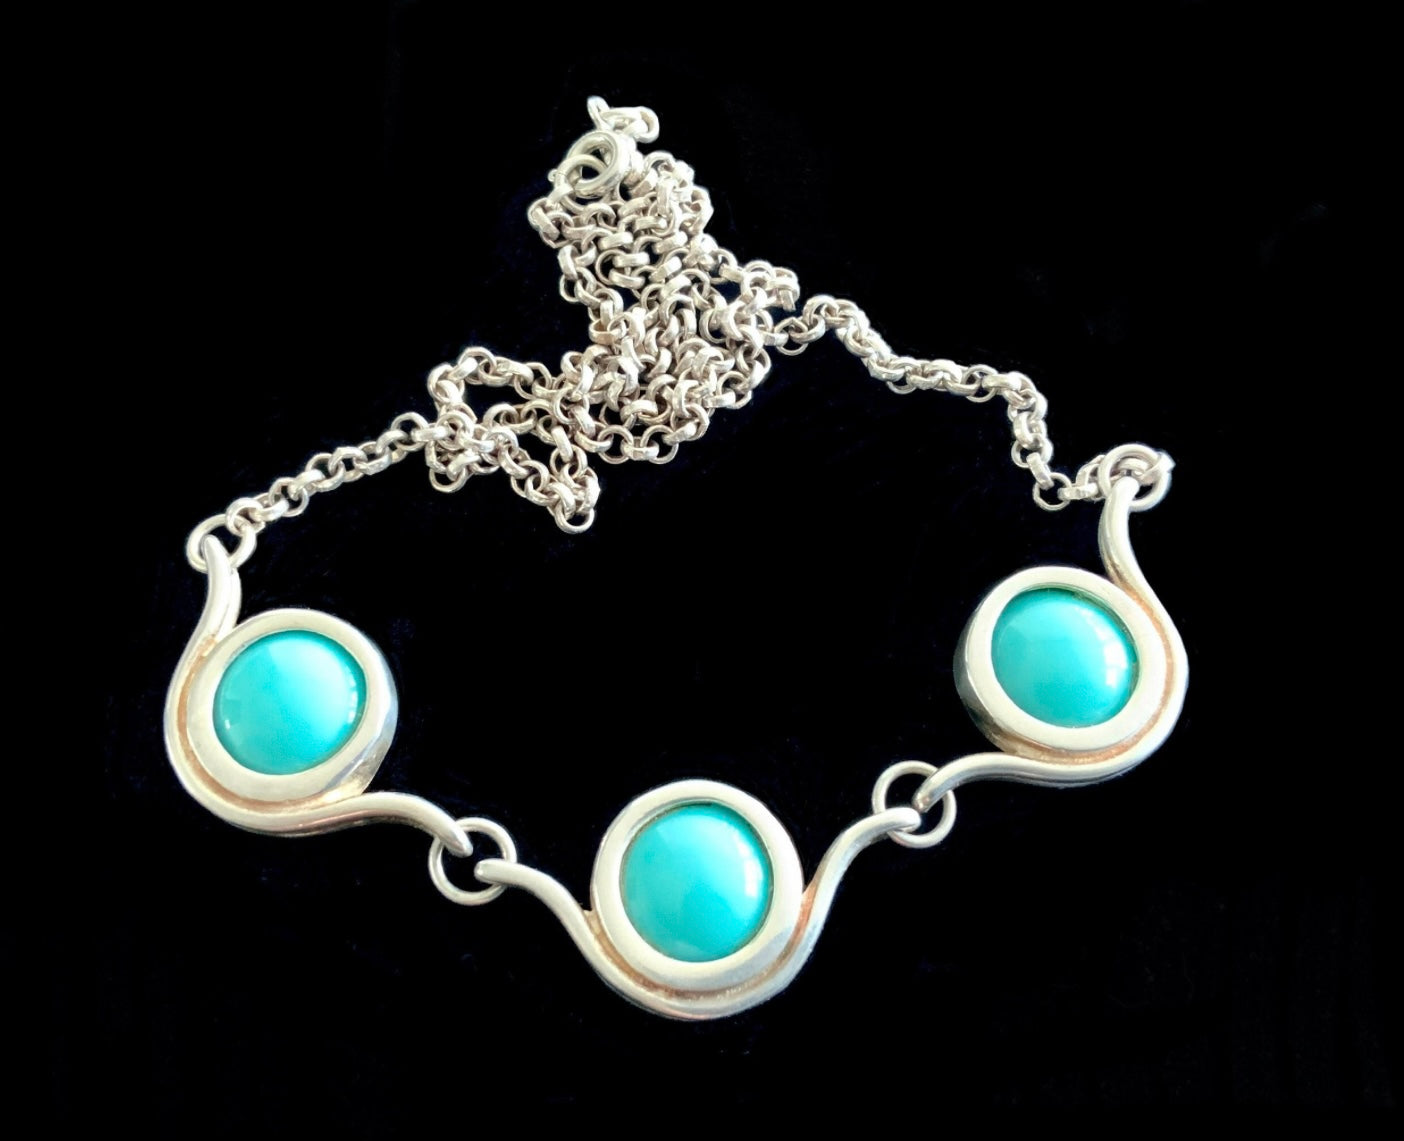 Modernist Turquoise & Sterling Silver 925 Necklace 45cm